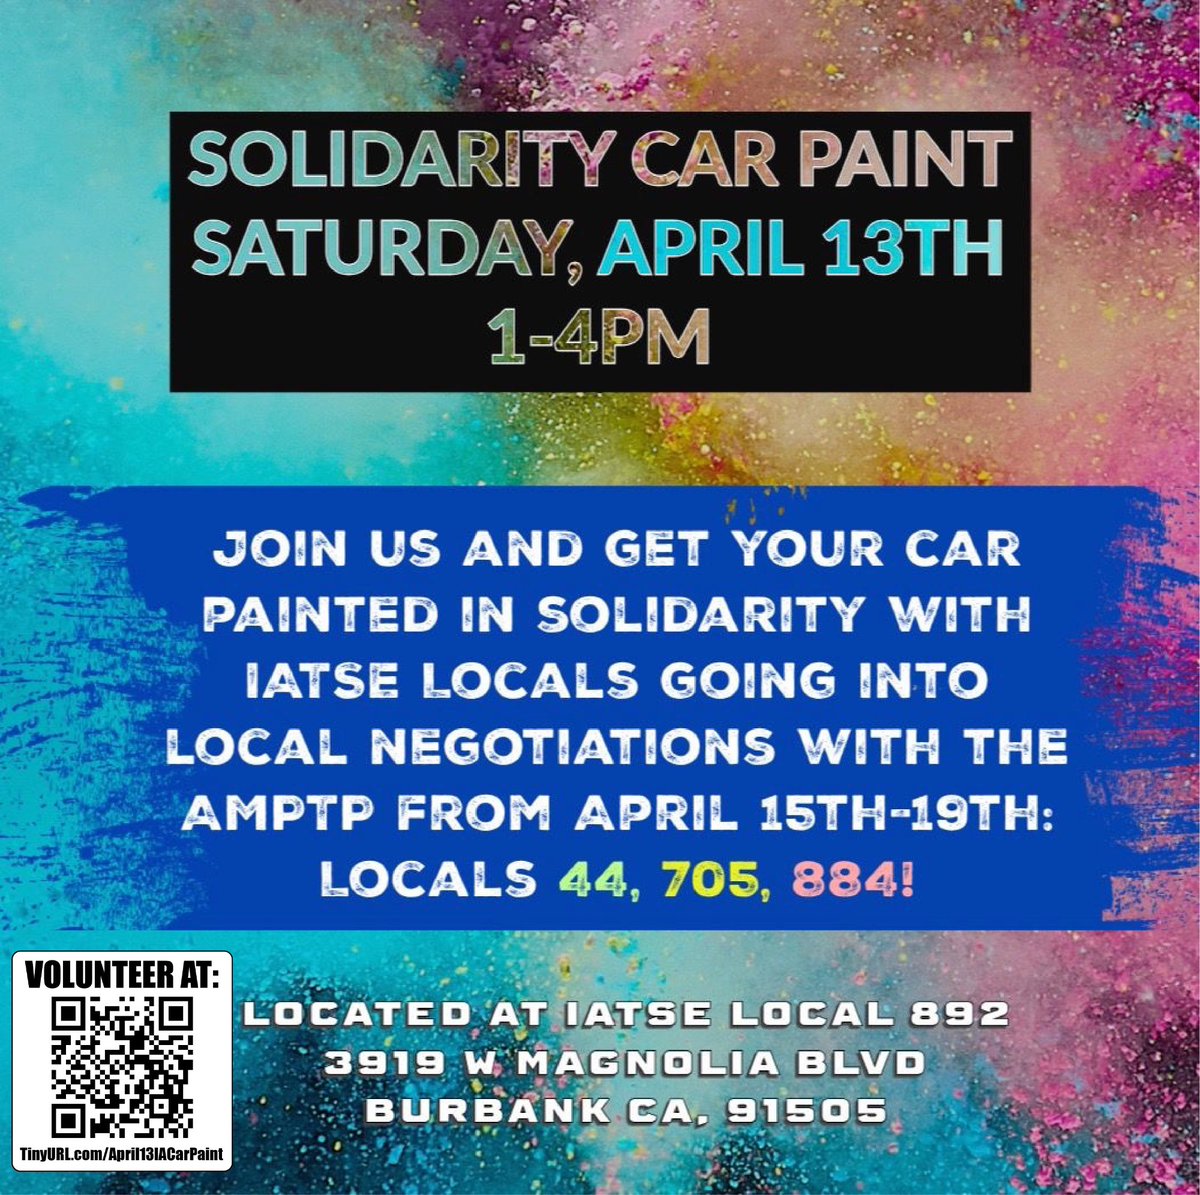 SOLIDARITY CAR PAINT for Locals 44, 705 (that's us!) and 884 heading in to their local negotiations the week of 4/15. #mpc705 #ManyCraftsOneFight #ManyCraftsOneCrew #IASolidarity #PayEquityForCostumes #705PayEquity #PayEquityForPinkWork #NakedWithoutUs #PayEquityNow